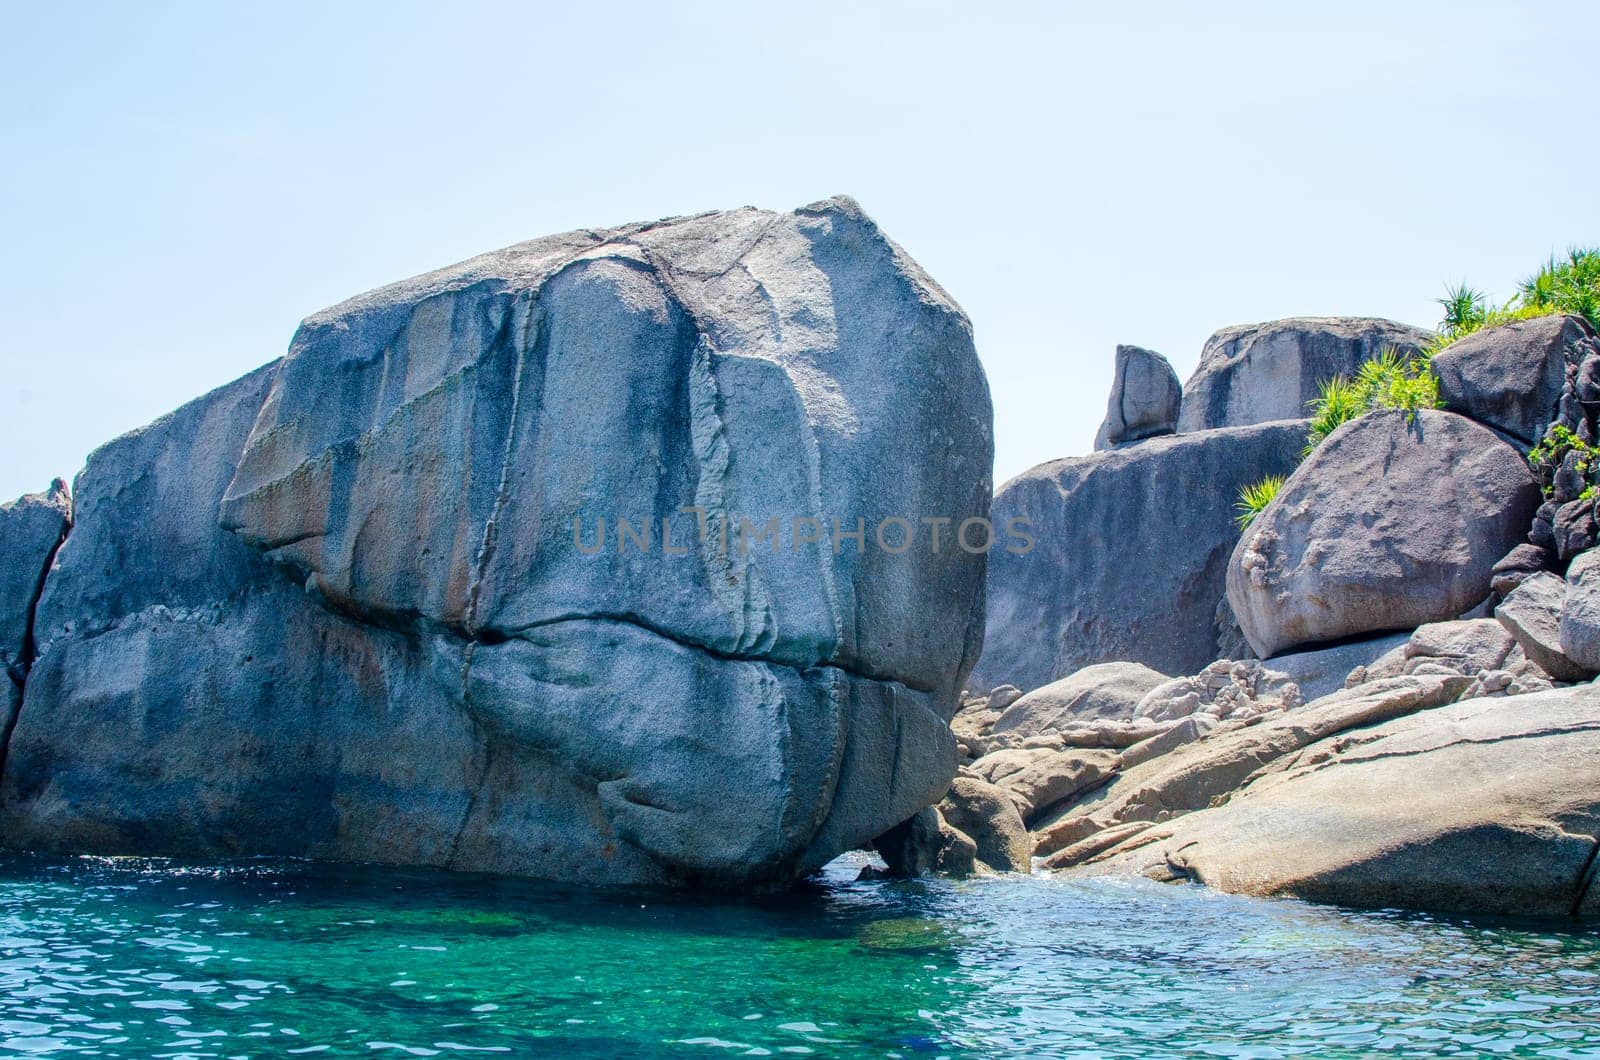 Rocks and stone beach Similan Islands with famous Sail Rock, Phang Nga Thailand nature landscape by lucia_fox